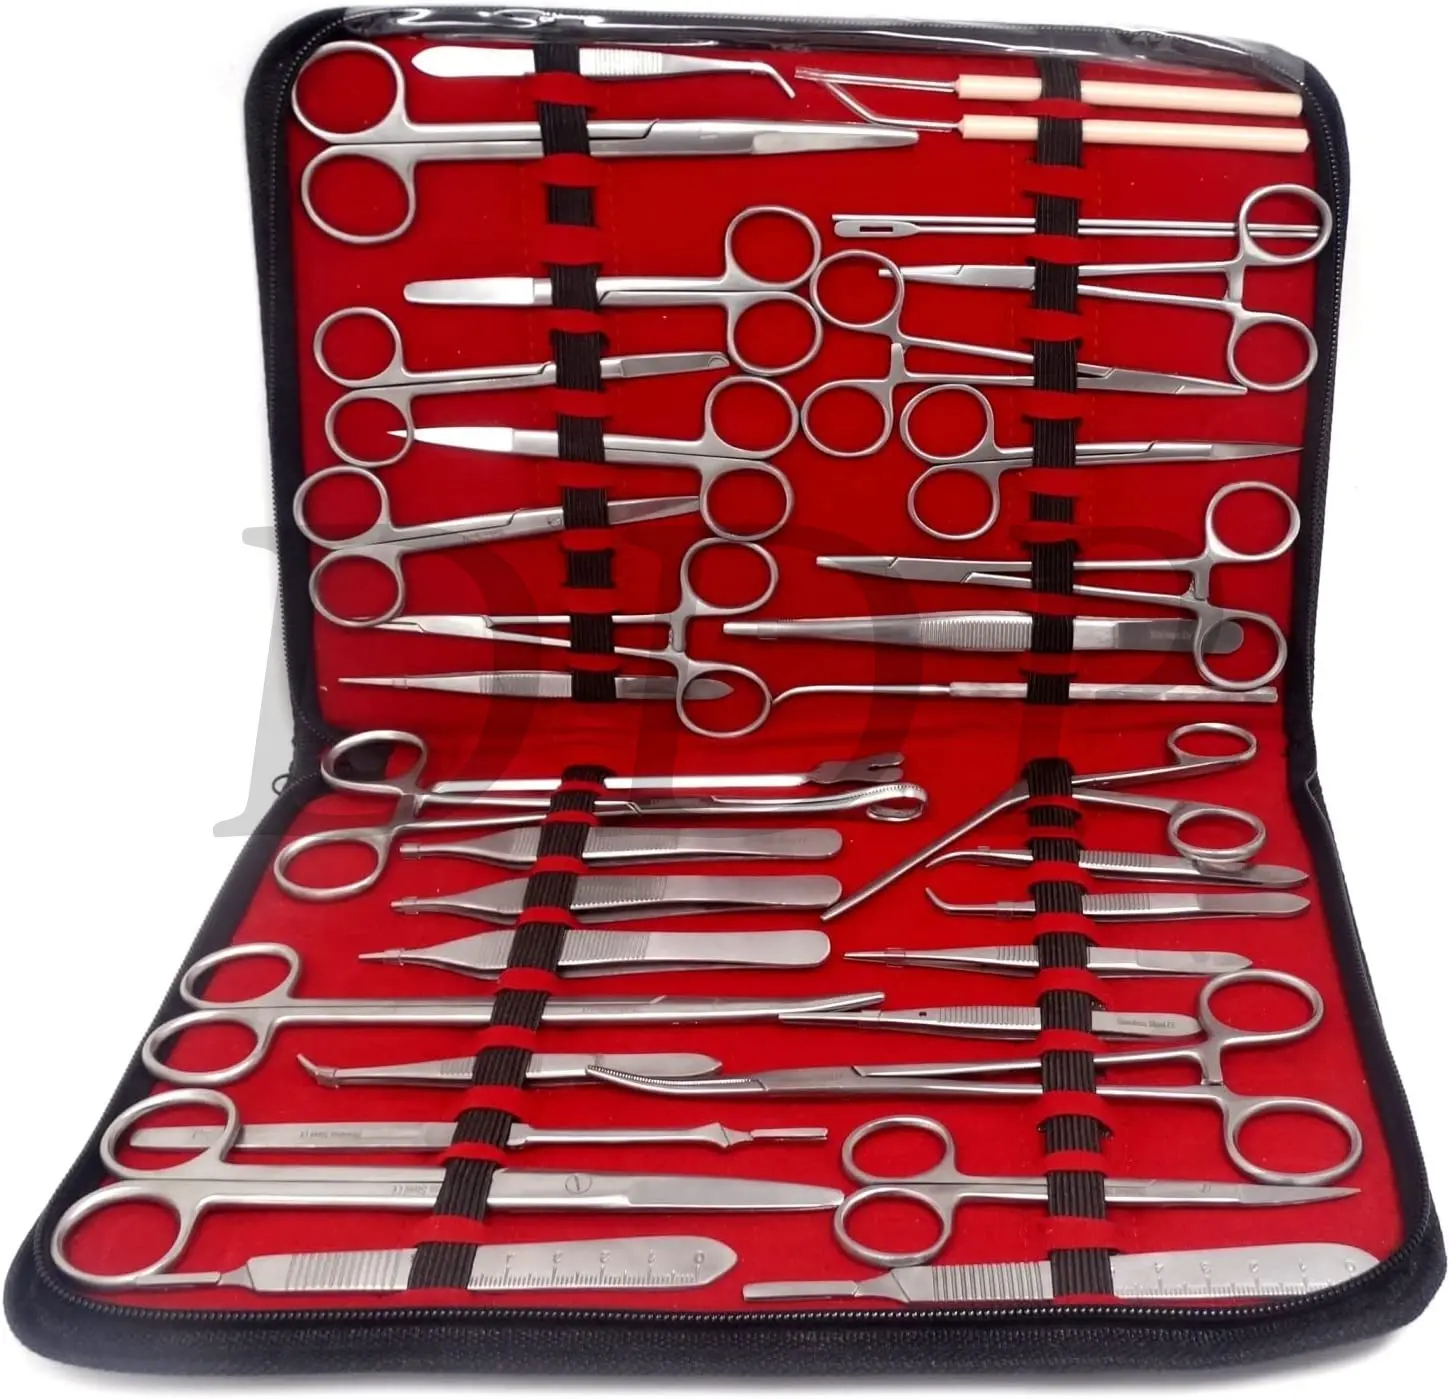 Basic Veterinary Instrument Kit German Stainless Steel Surgical Veterinary Surgical Kits Ce Approved In Best Quality